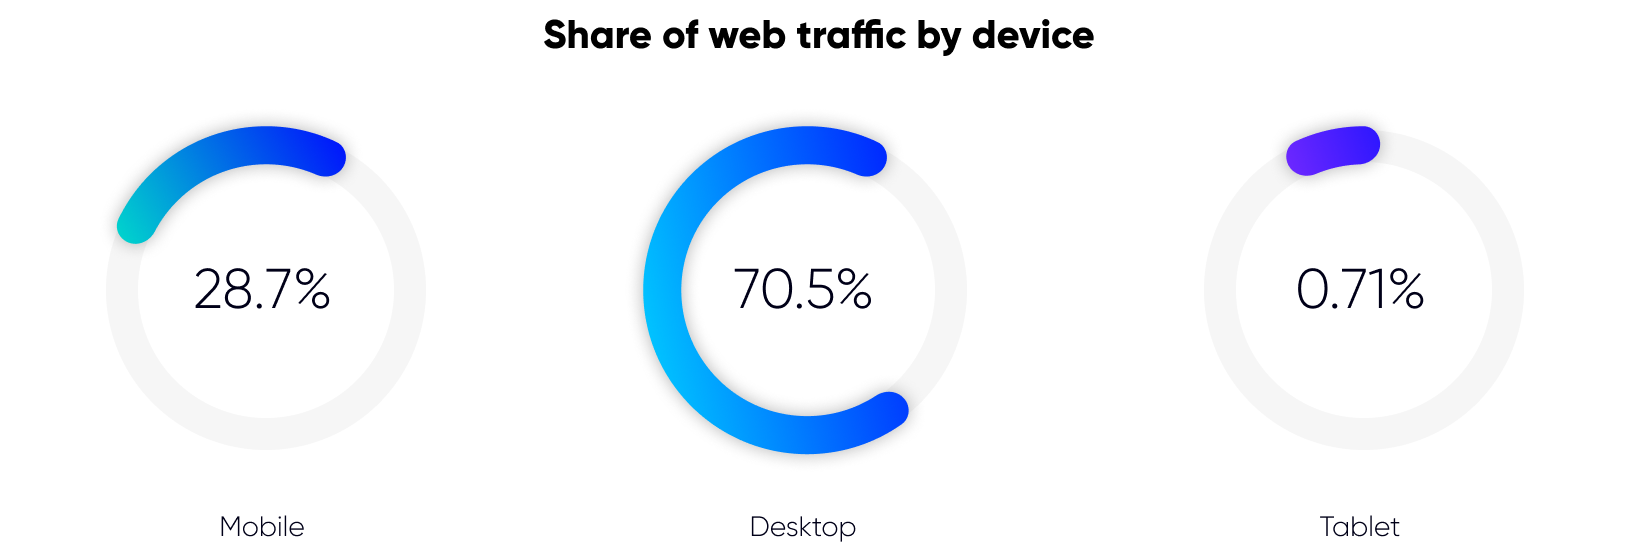 Share web traffic by device in Armenia